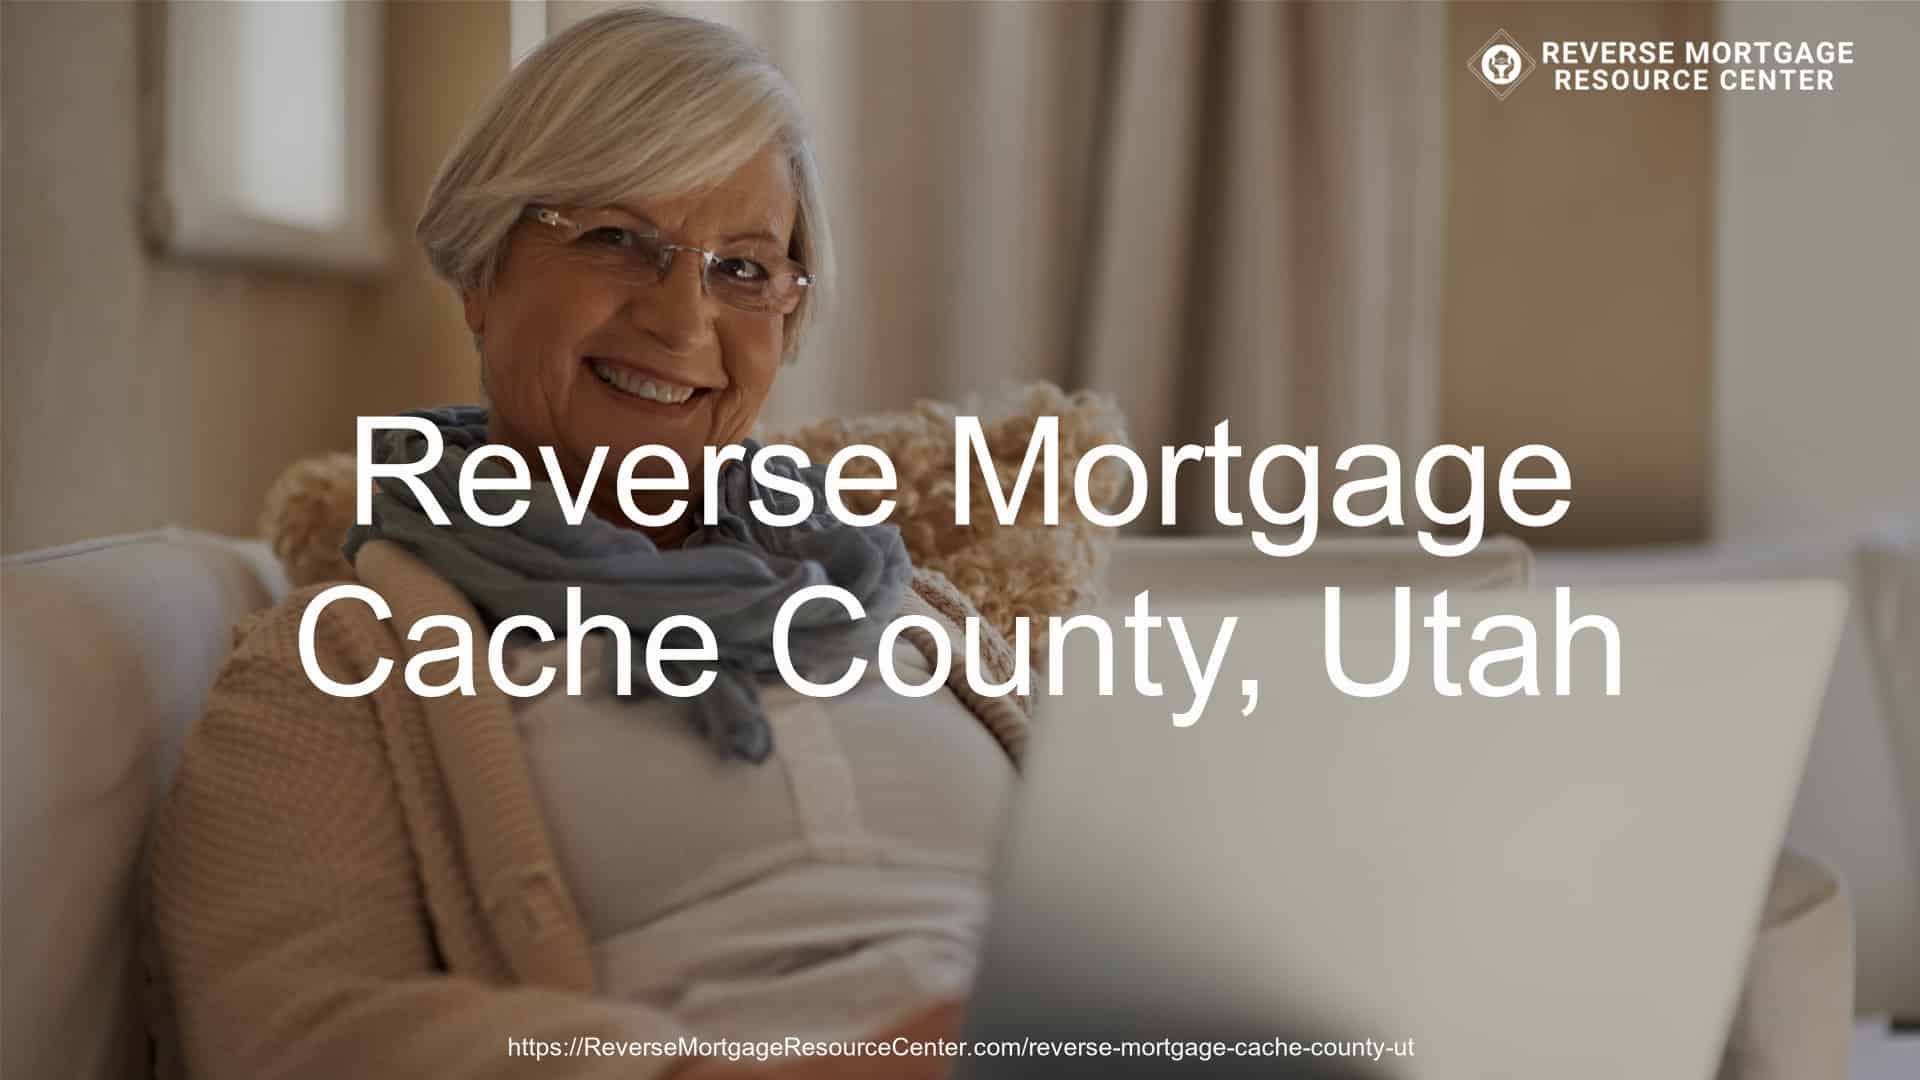 Reverse Mortgage Loans in Cache County Utah